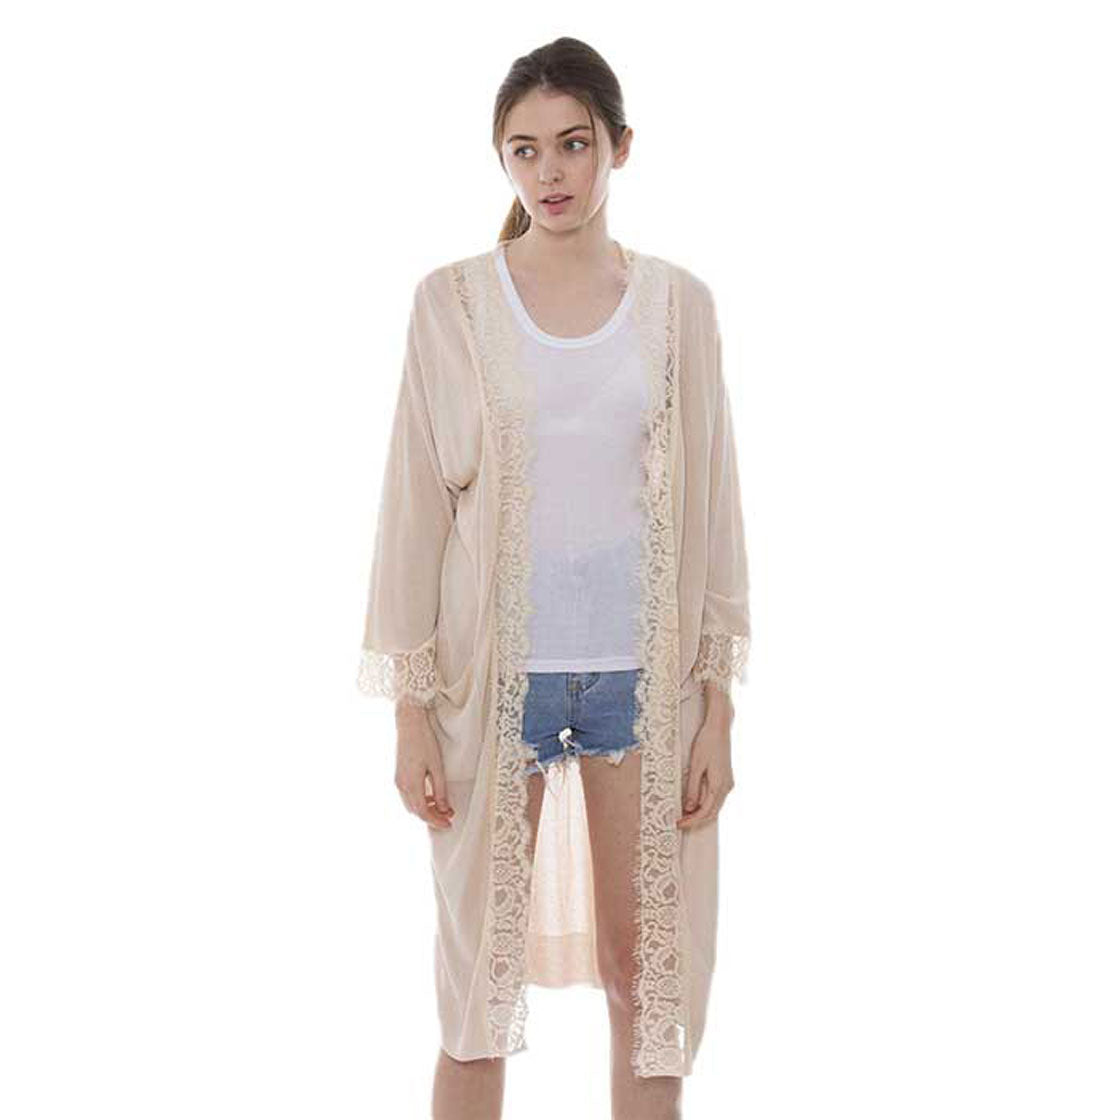 Beige Solid Lace Hem Pockets in Front Long Cardigan. Delicate open front floral lace beach cover-up featuring wide sleeves and hip length. Beach or Poolside chic is made easy with this lightweight cover-up featuring flower detail and a relaxed silhouette, look perfectly breezy and laid-back as you head to the beach. Also an accessory easy to pair with so many tops! From stylish layering camis to relaxed tees, you can throw it on over so many pieces elevating any casual outfit! Great gift idea.